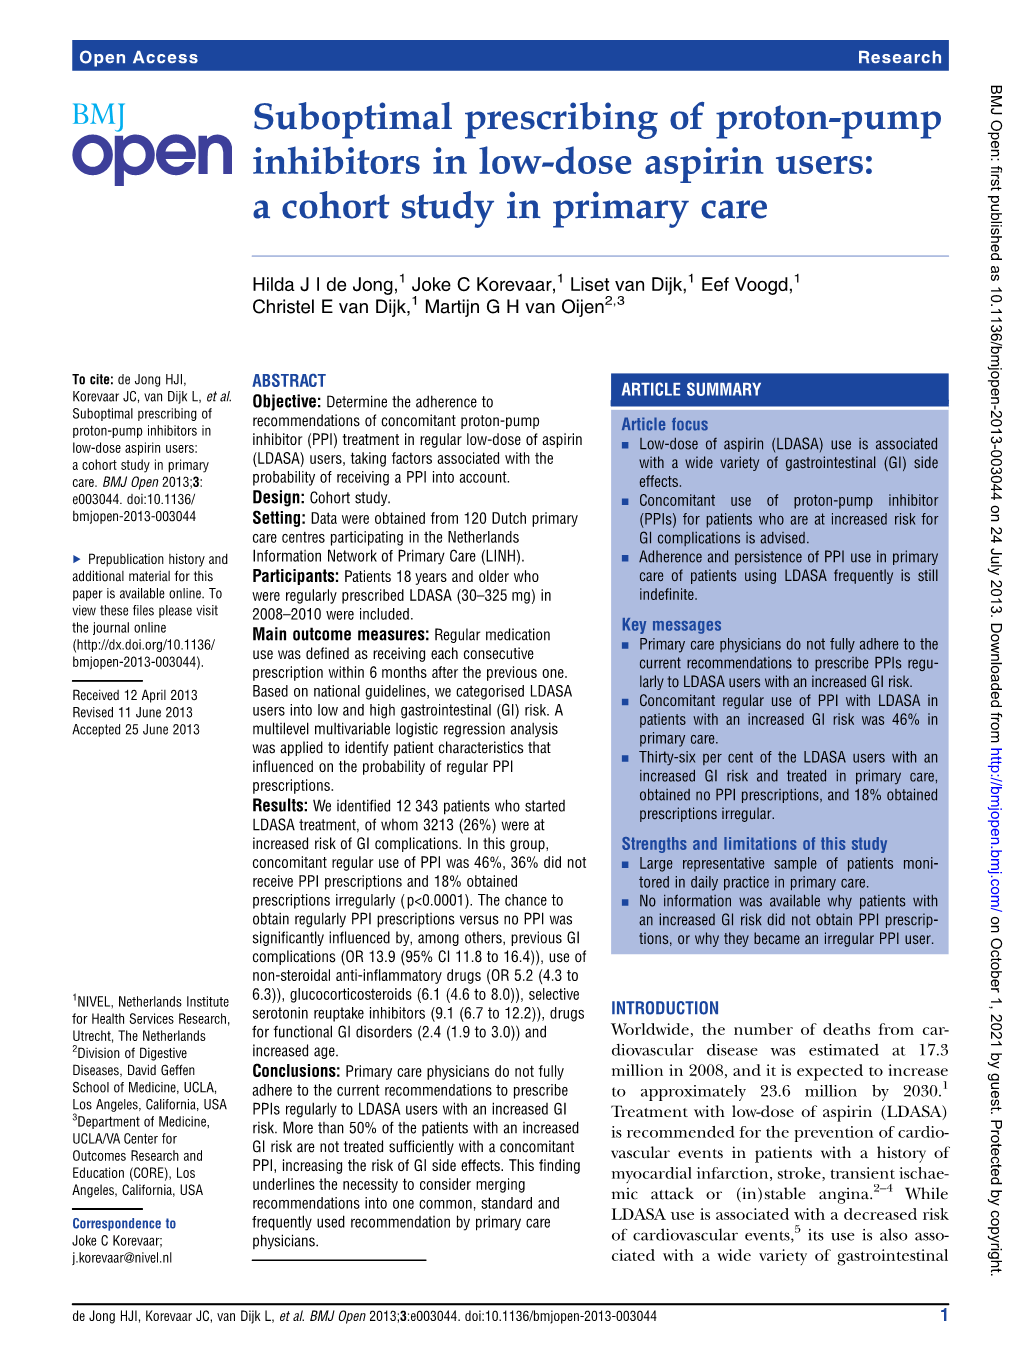 Suboptimal Prescribing of Proton-Pump Inhibitors in Low-Dose Aspirin Users: a Cohort Study in Primary Care